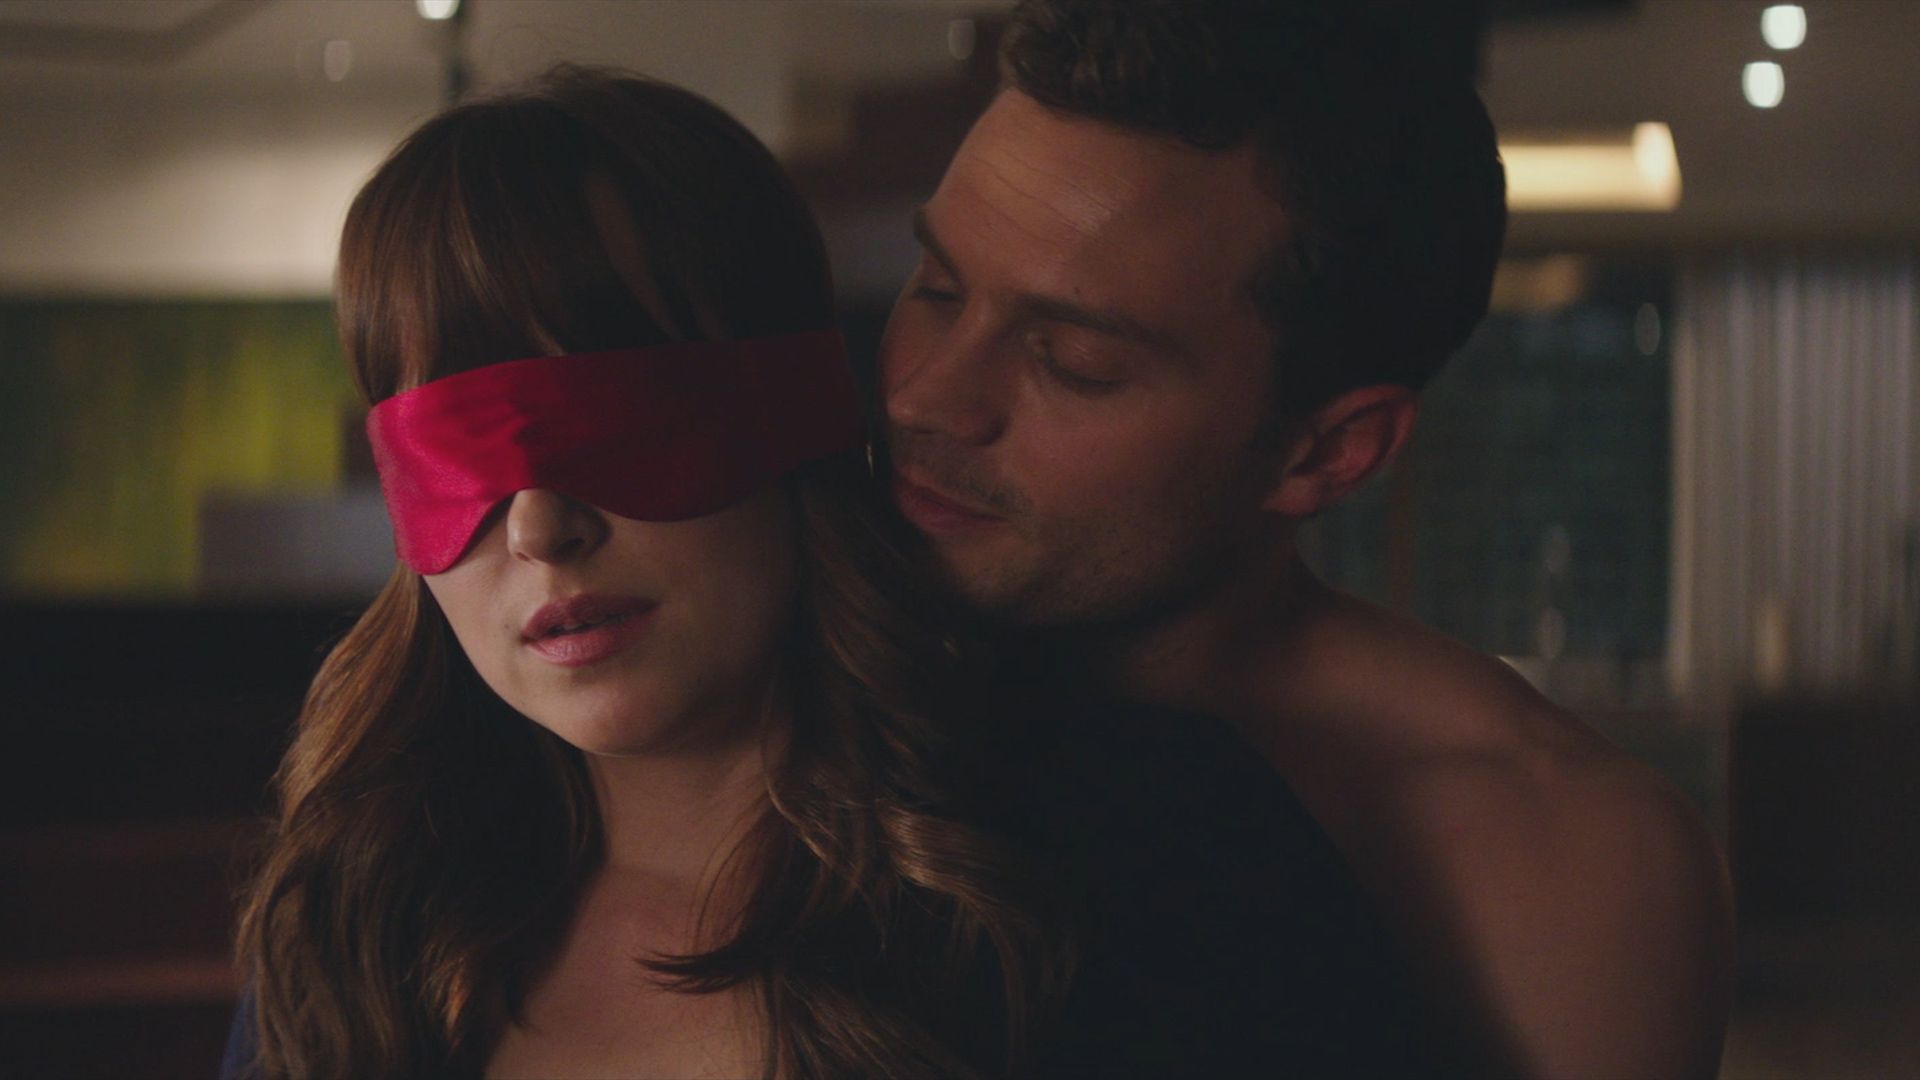 Watch Exclusive Fifty Shades Freed Clip - Christian Grey Surprises Ana in Fifty Shades Freed